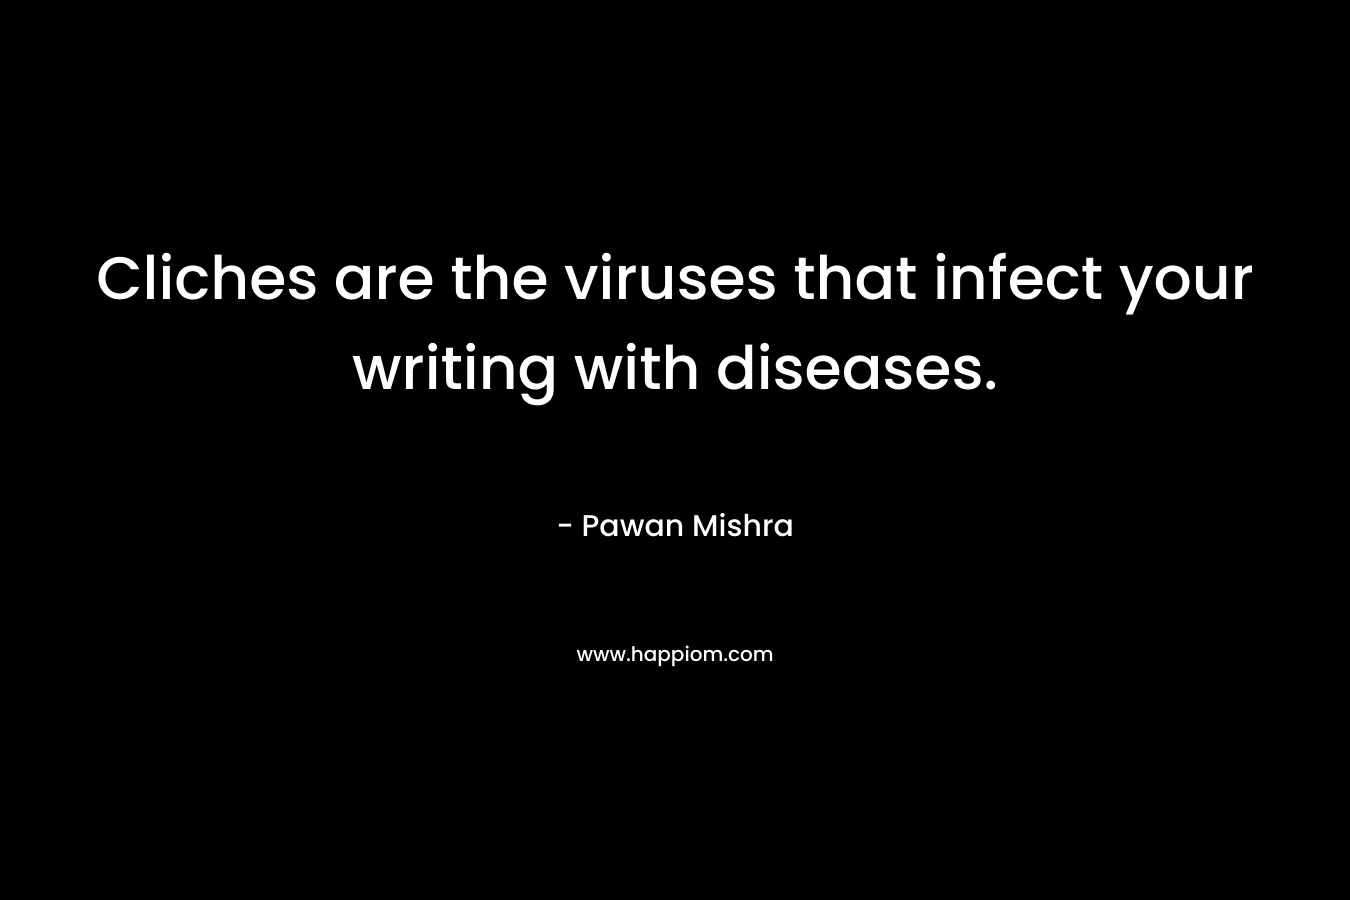 Cliches are the viruses that infect your writing with diseases. – Pawan Mishra